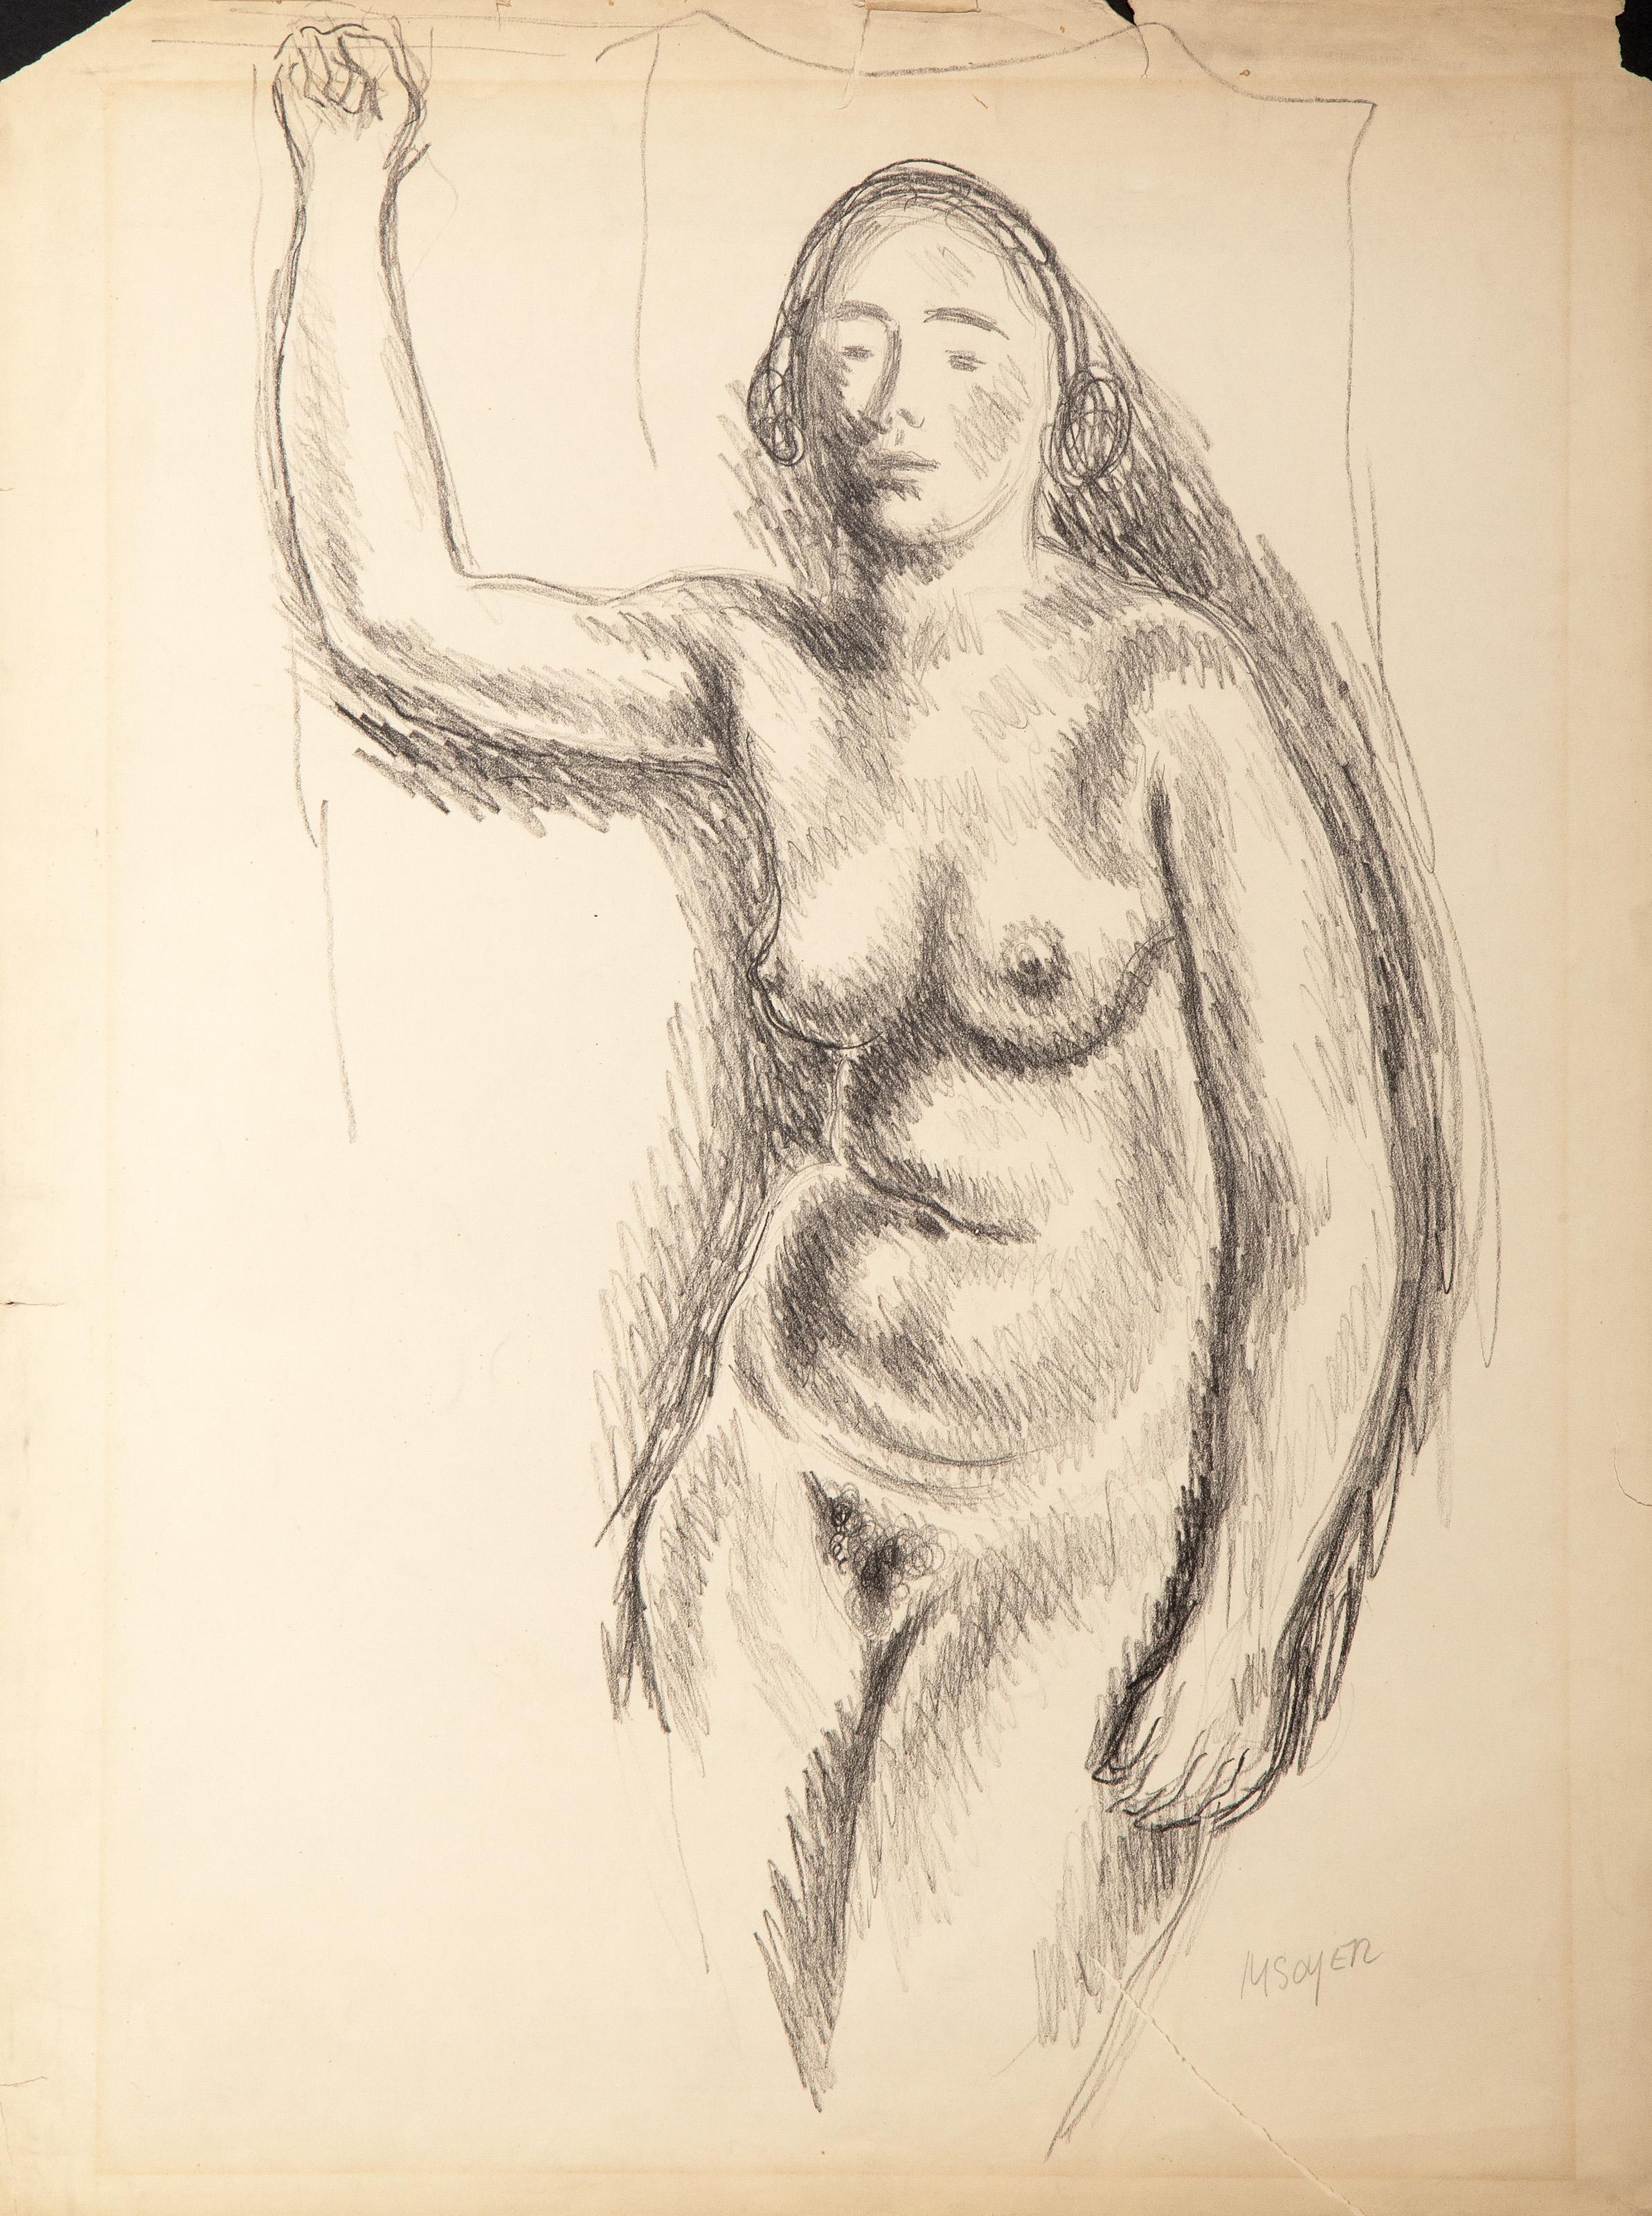 Moses Soyer, American (1899 - 1974) -  Female Nude. Medium: Graphite Drawing on Paper, signed in pencil lower right, Size: 29.25 x 19.75 in. (74.3 x 50.17 cm) 